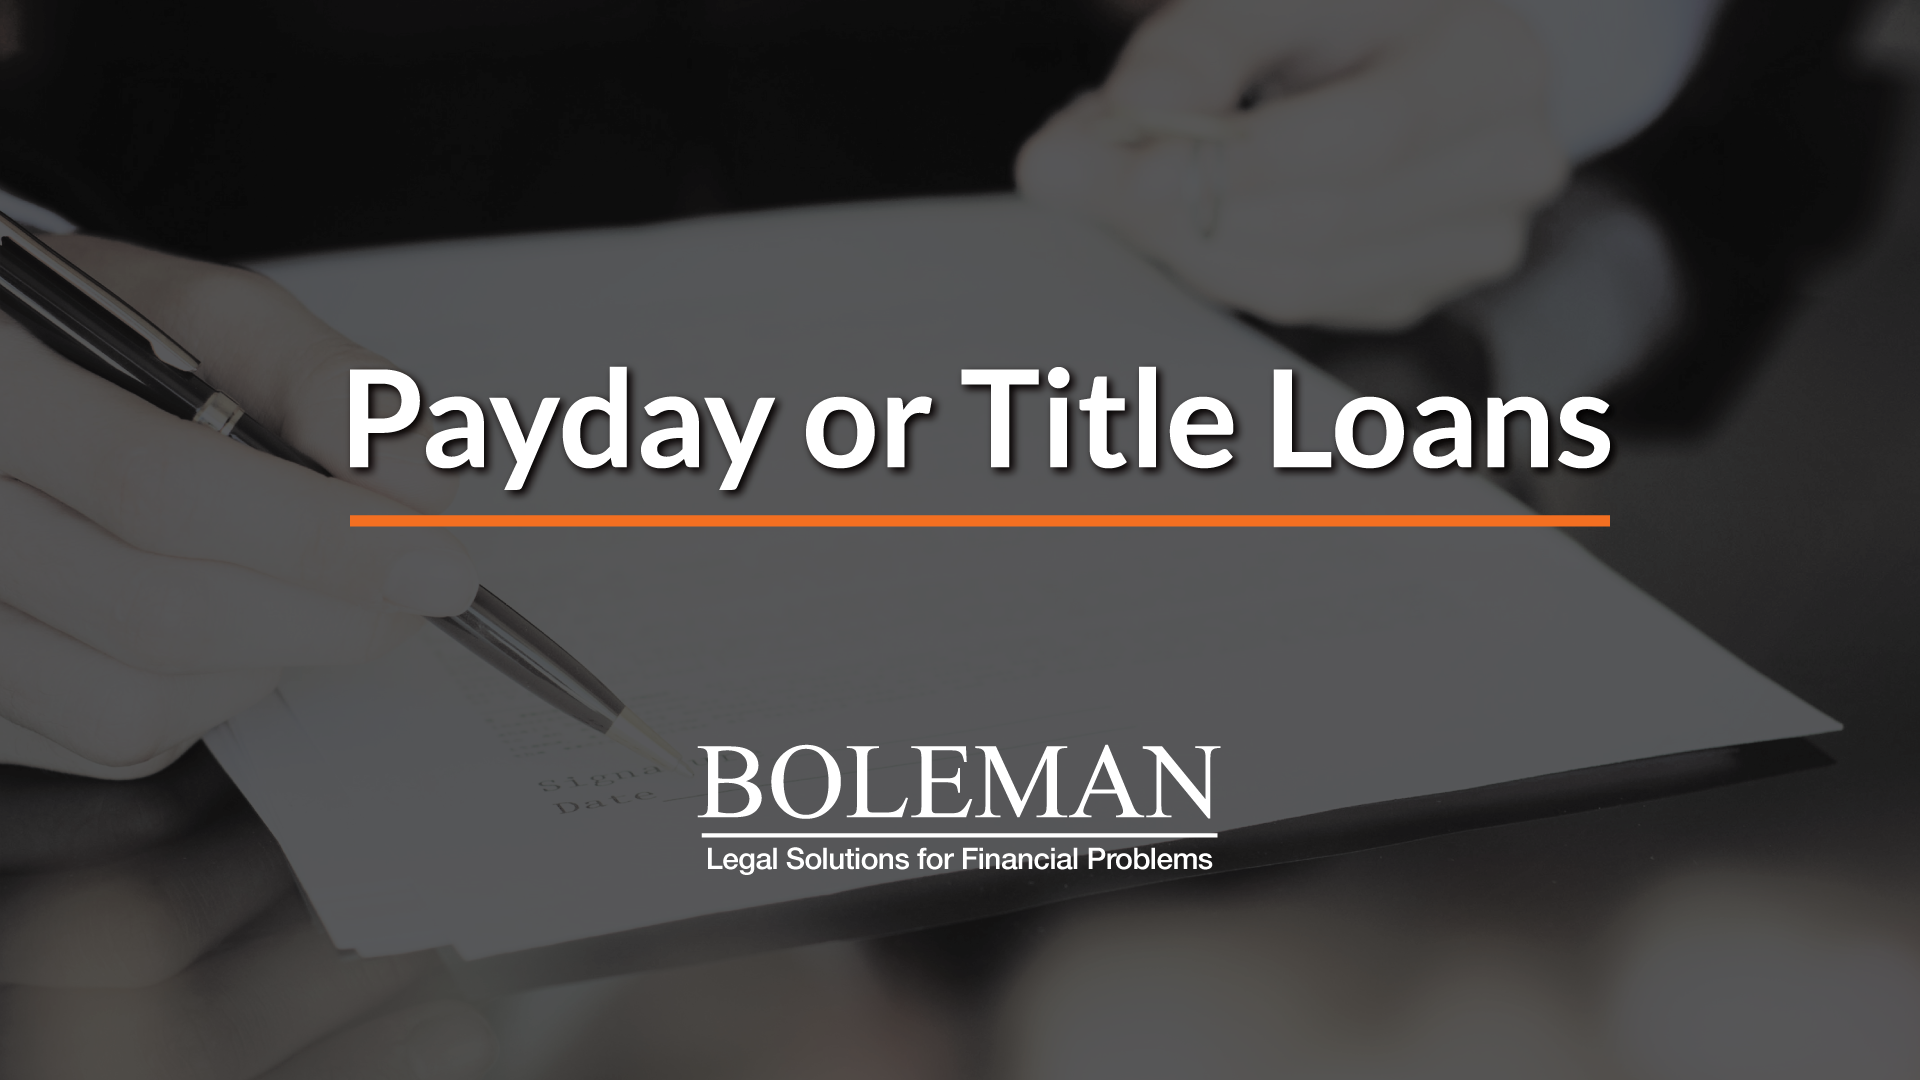 Payday or Title Loans